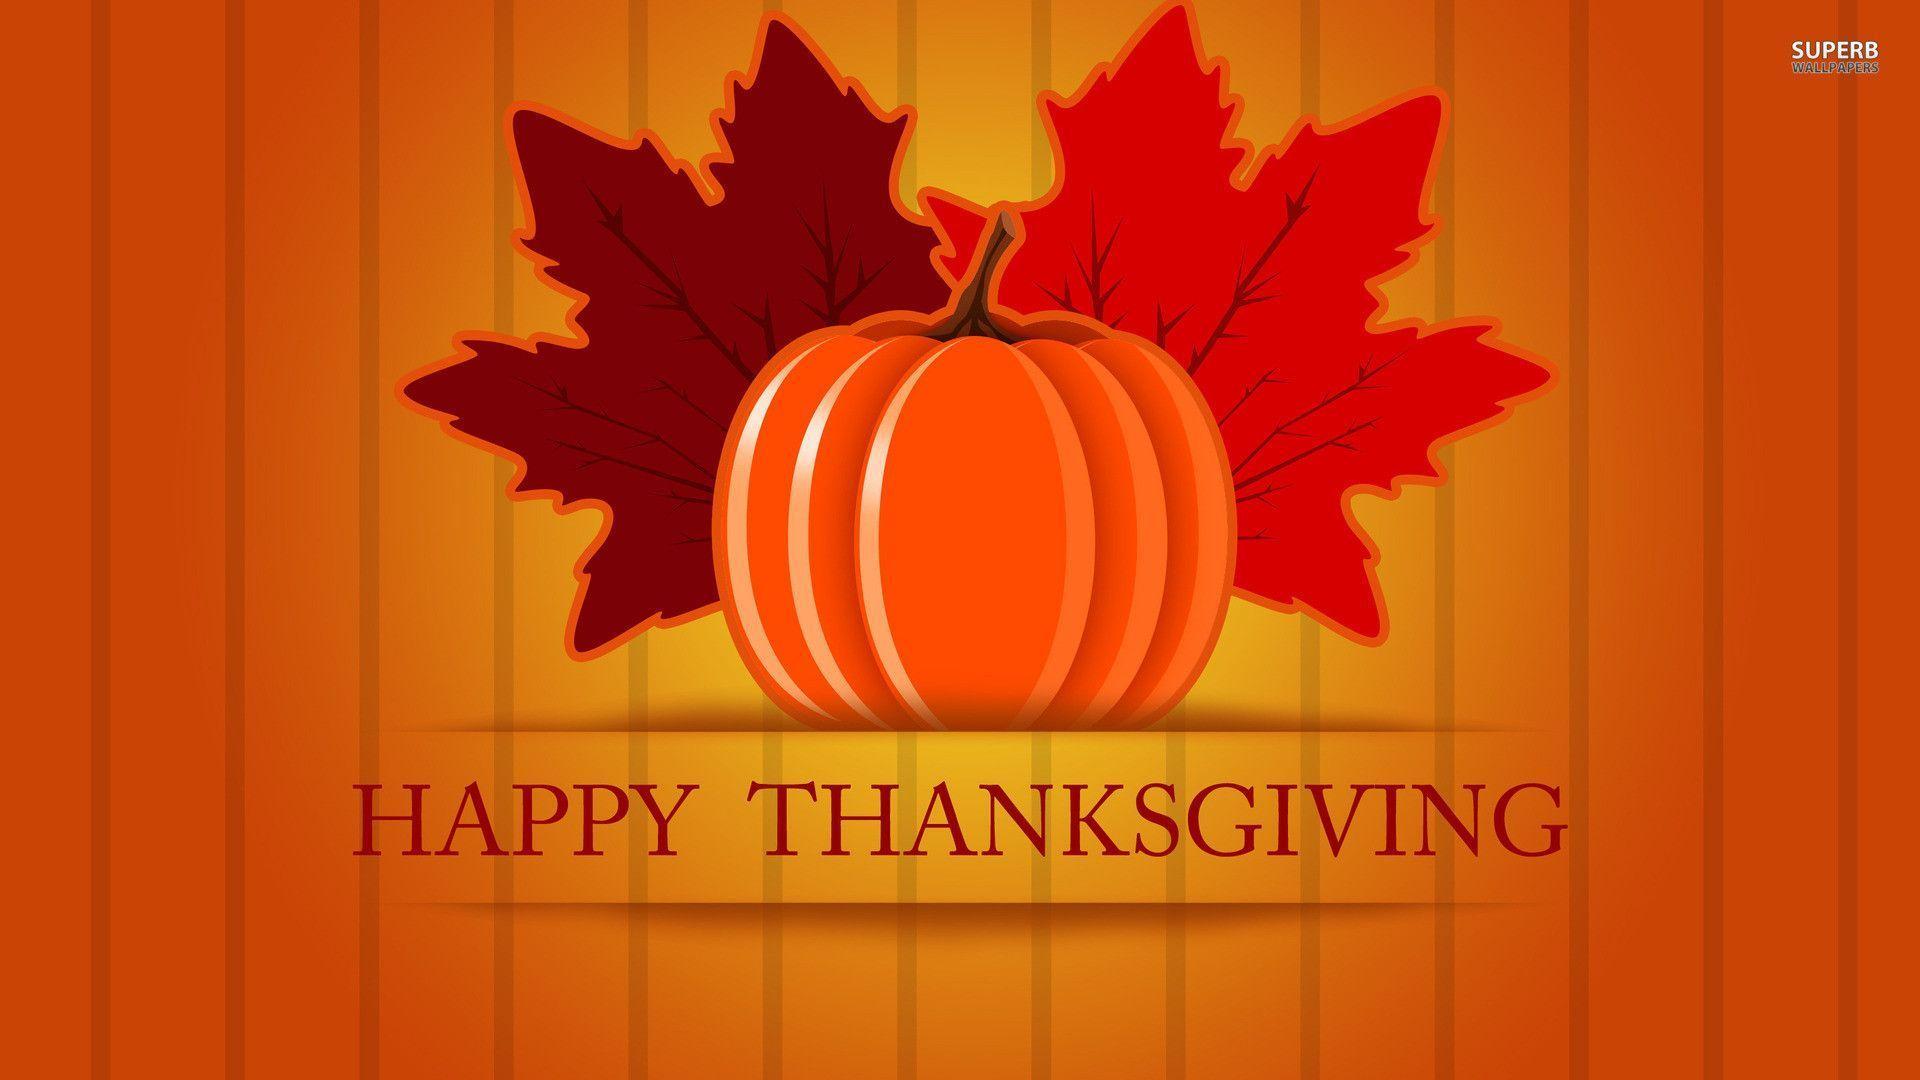 Happy Thanksgiving Desktop Wallpaper and Picture. Download Themes